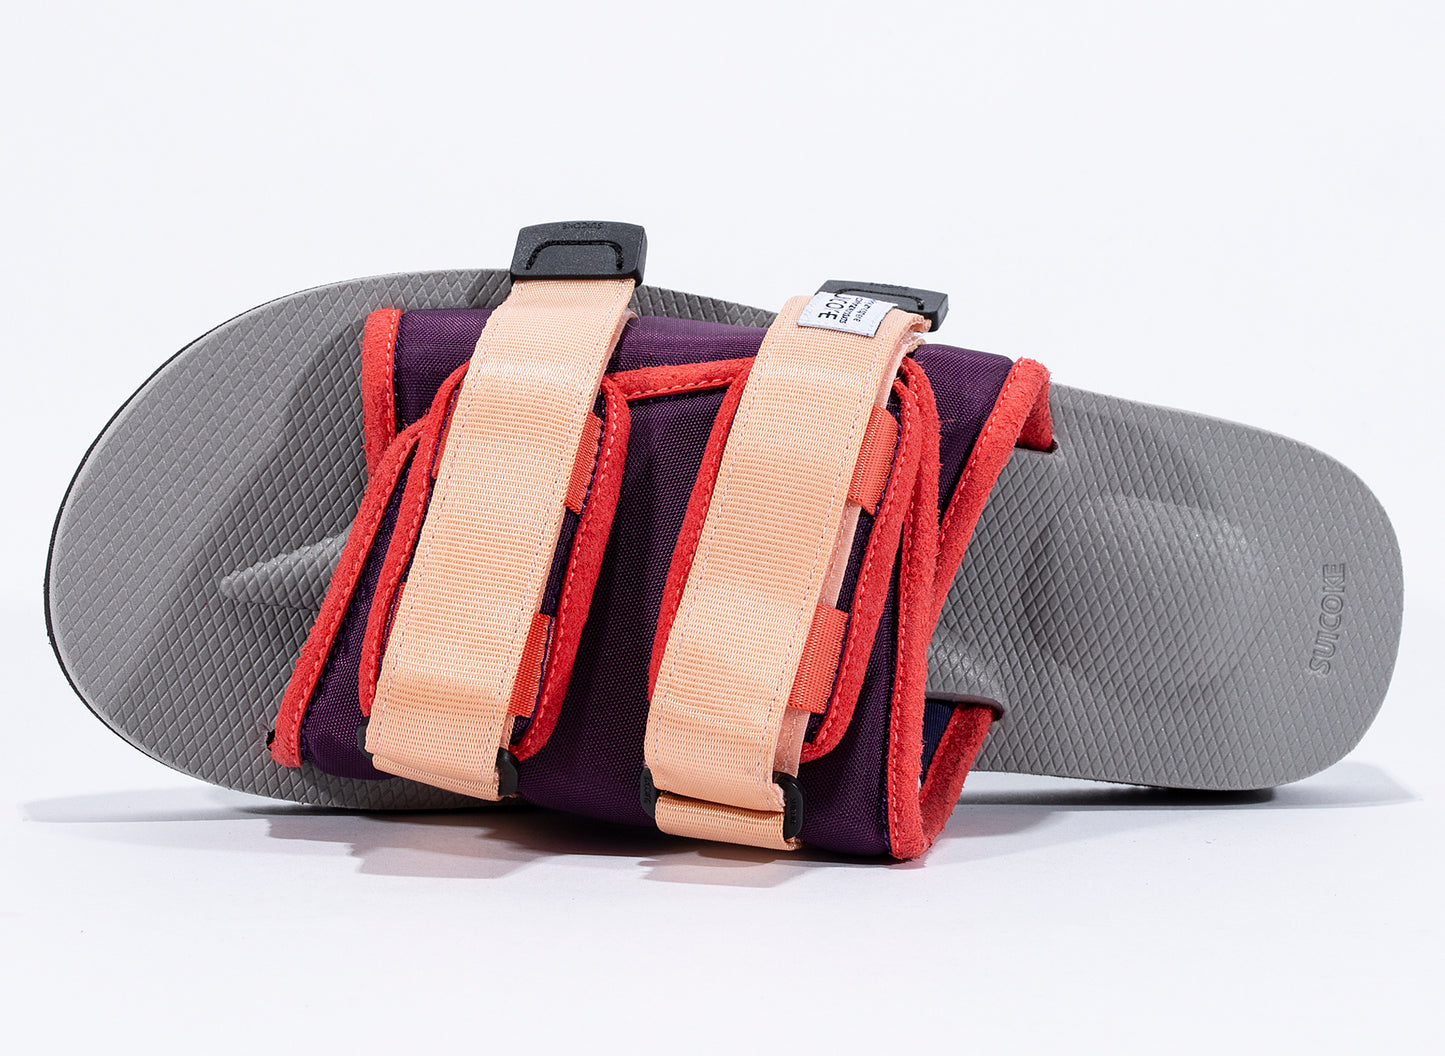 Suicoke Moto-Cab Sandals in Pink